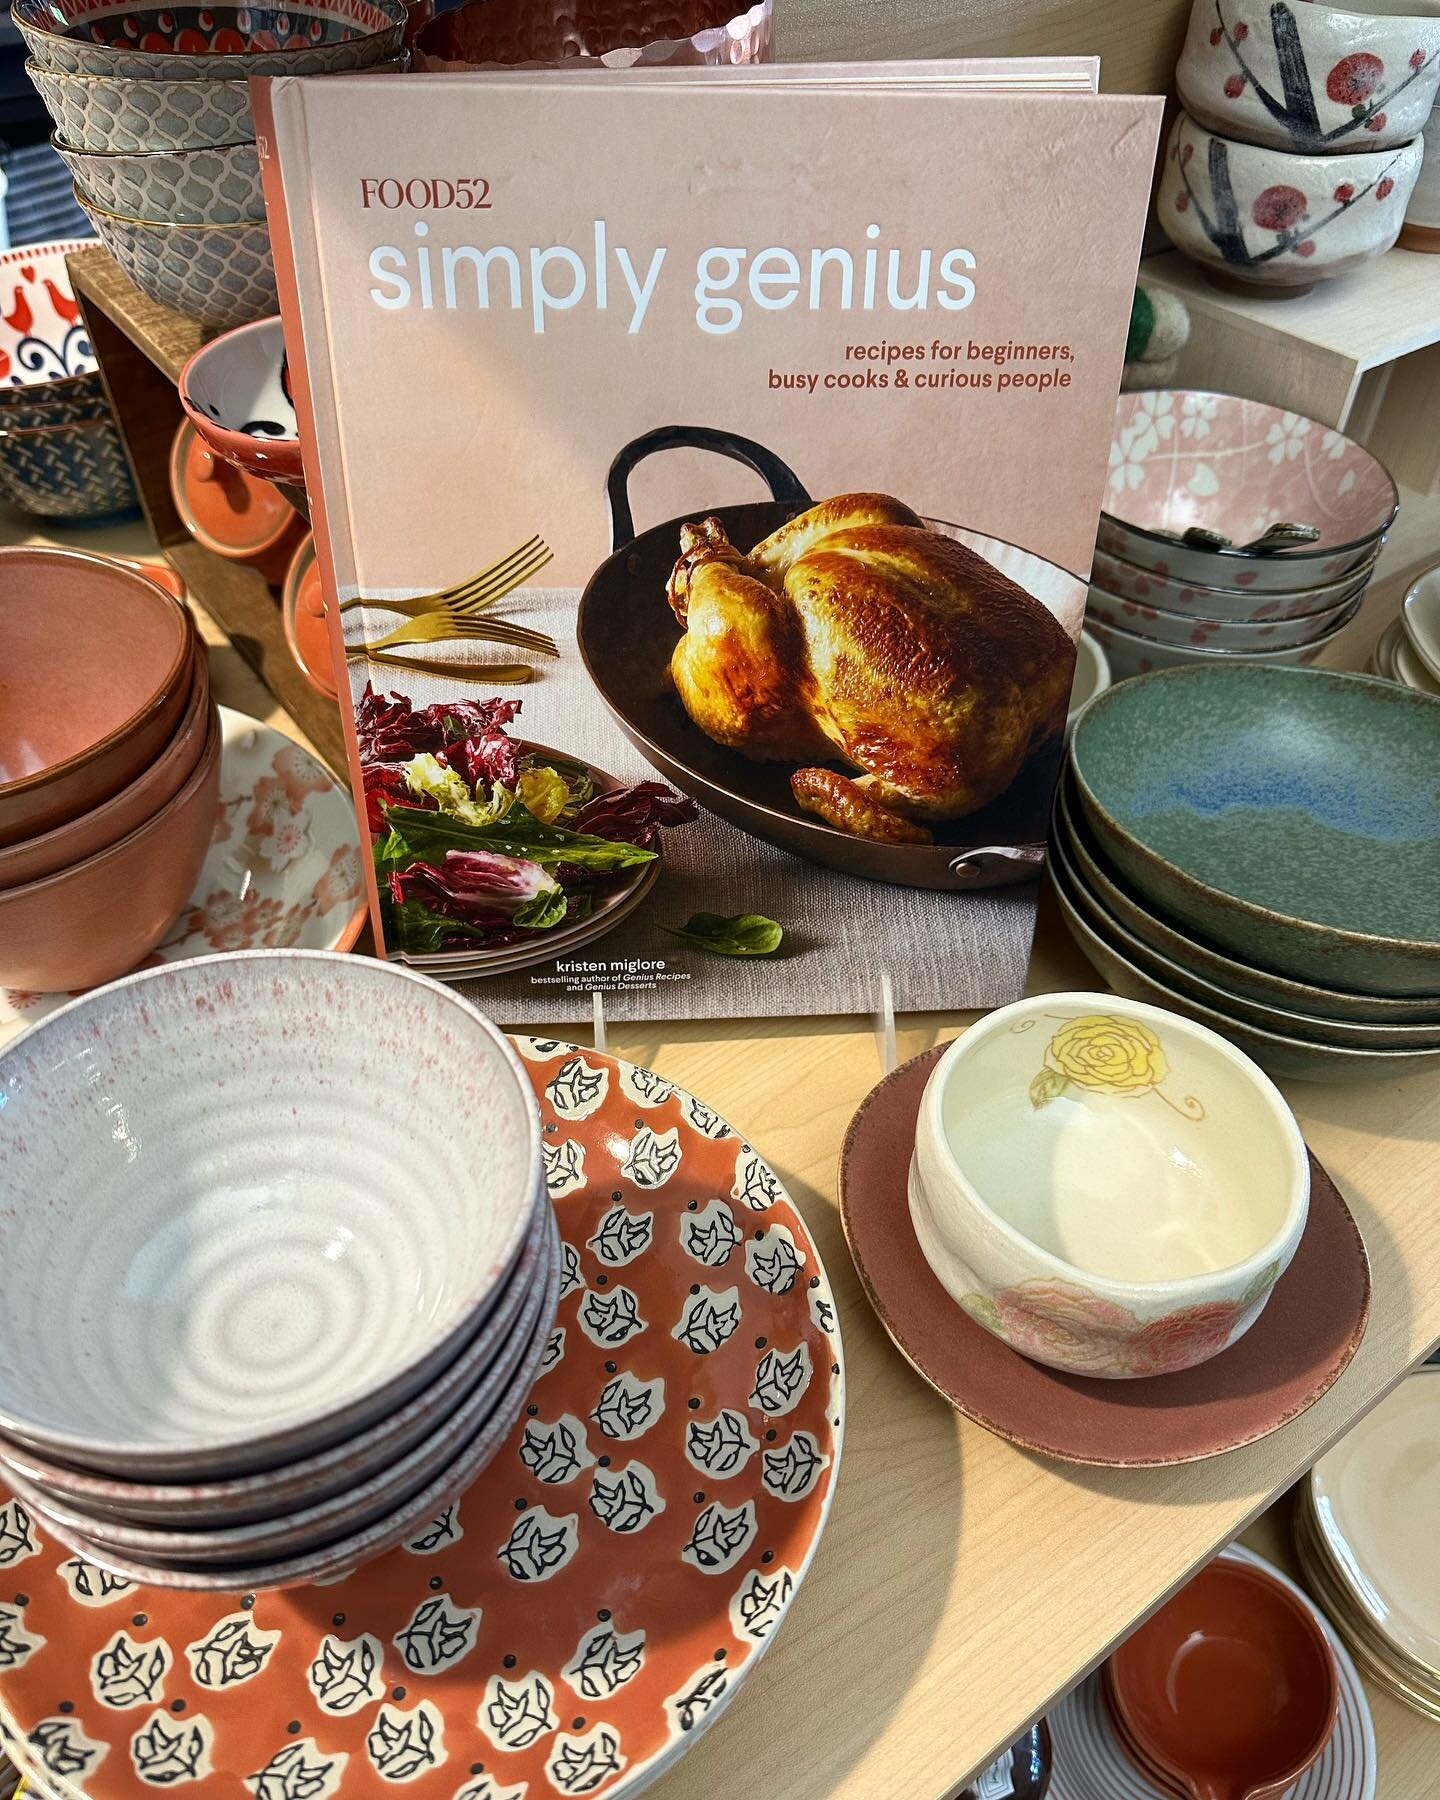 Give the gift of Simply Genius - great for newer cooks, busy cooks, and the curious alike.